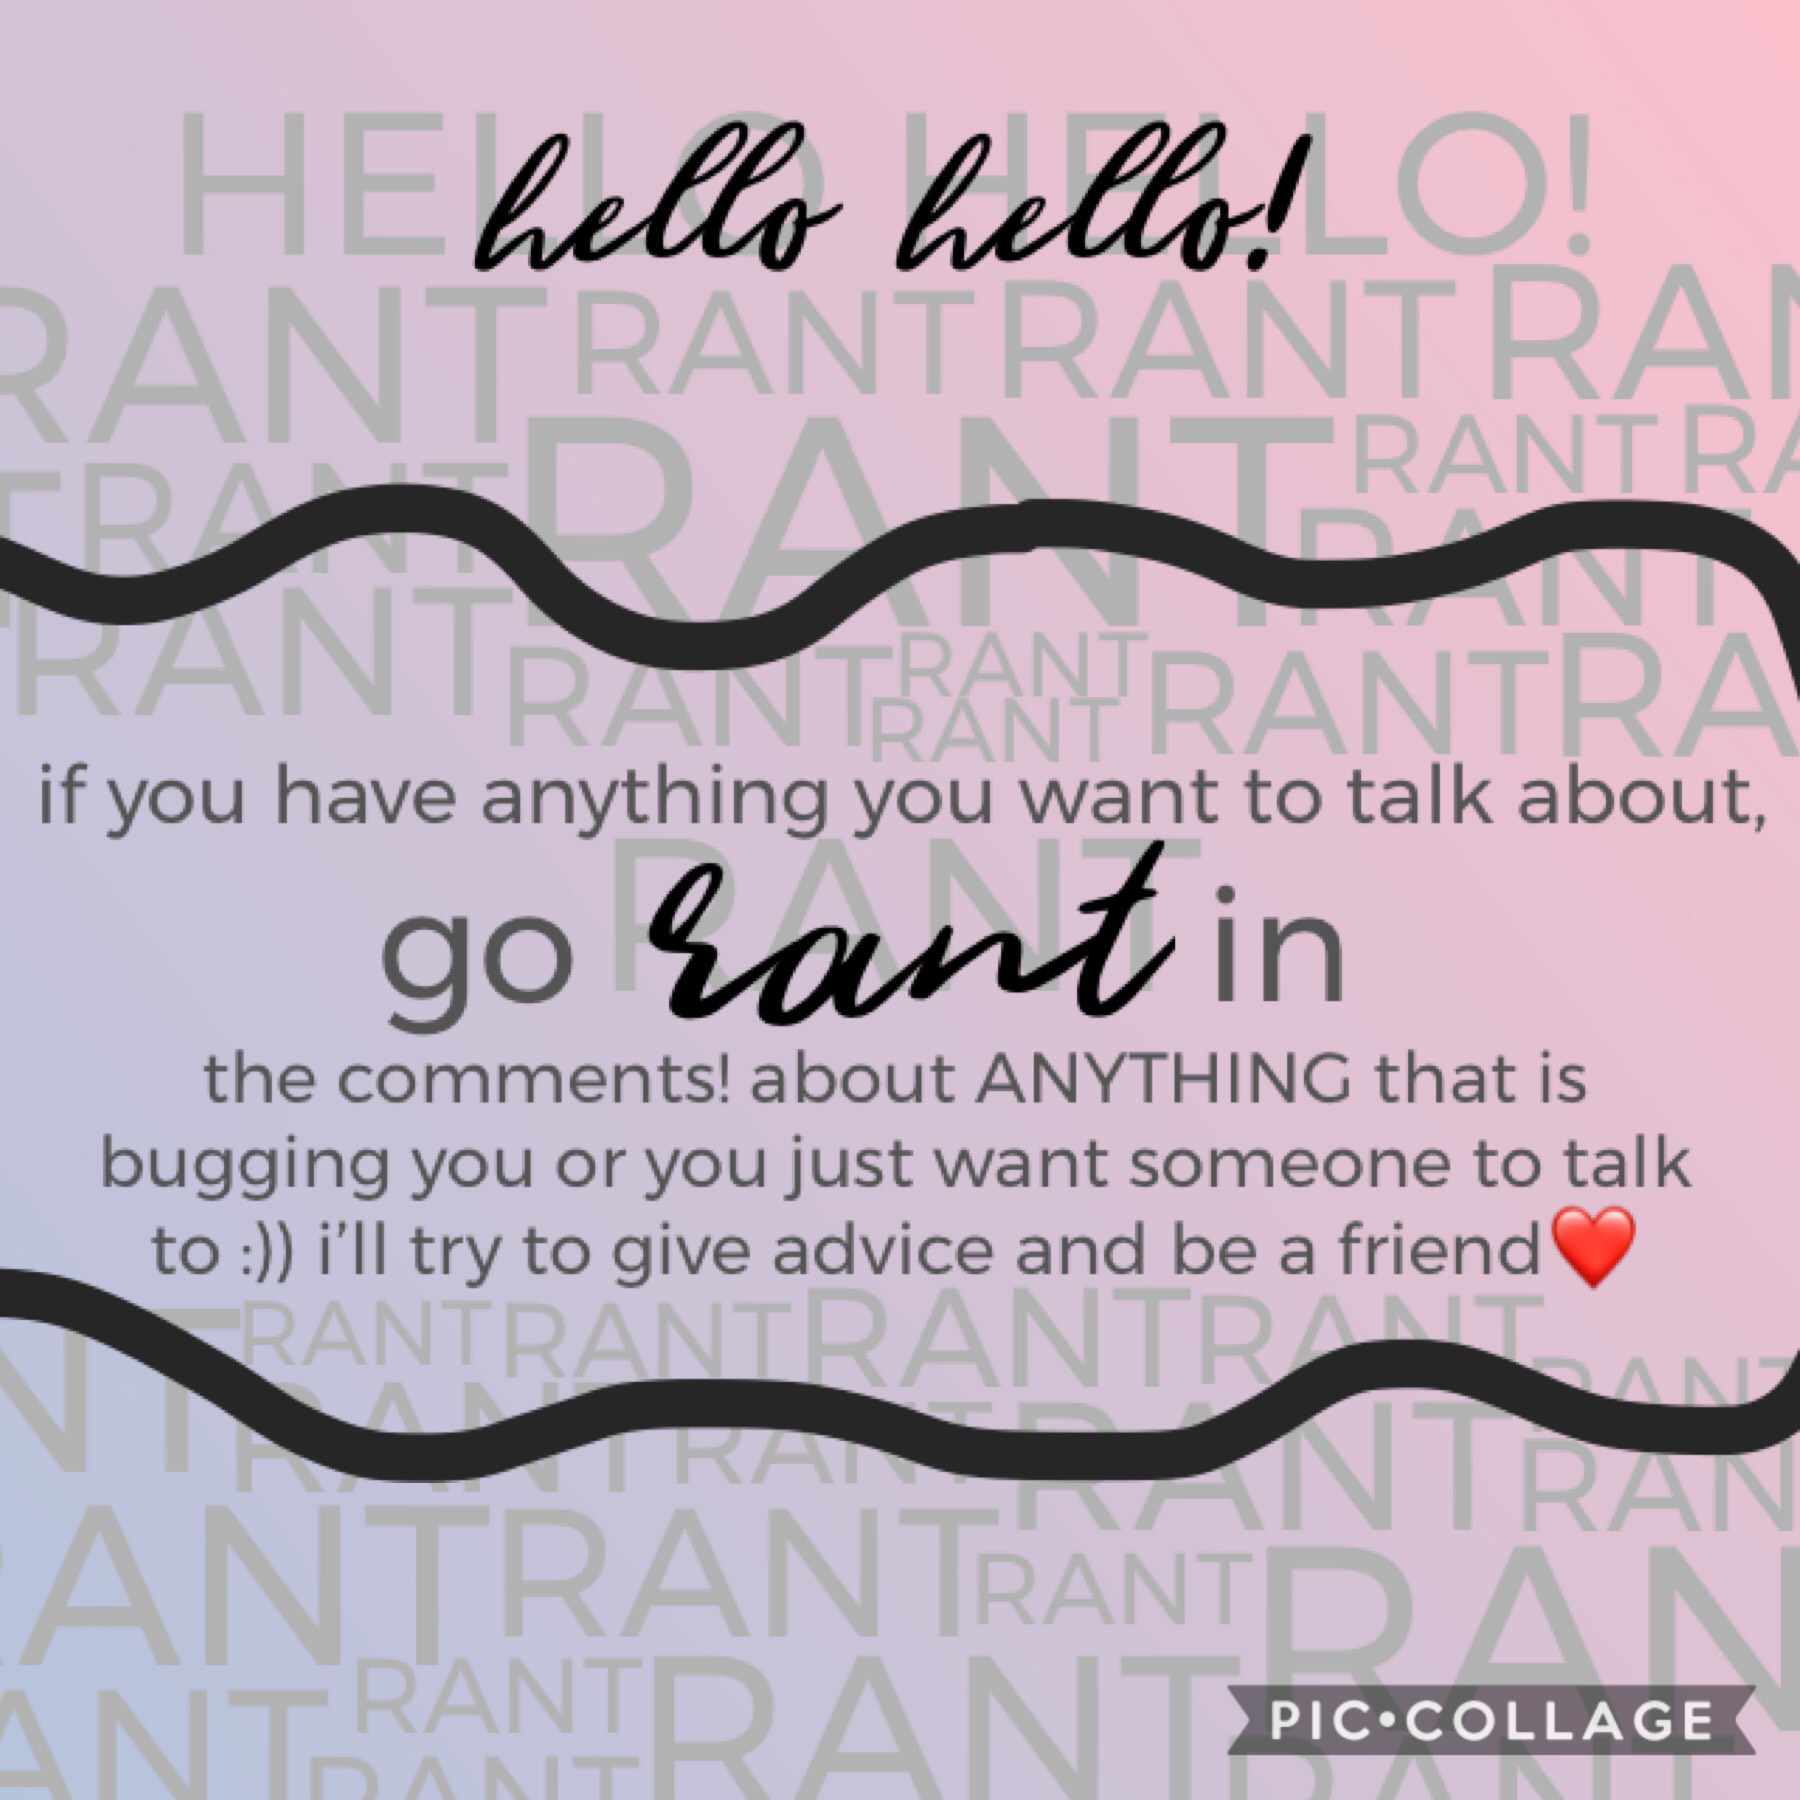 rant in the comments! or just start with hello! i’m always open to making new friends and listening and helping💖💖

✨✨stay strong everyone✨✨